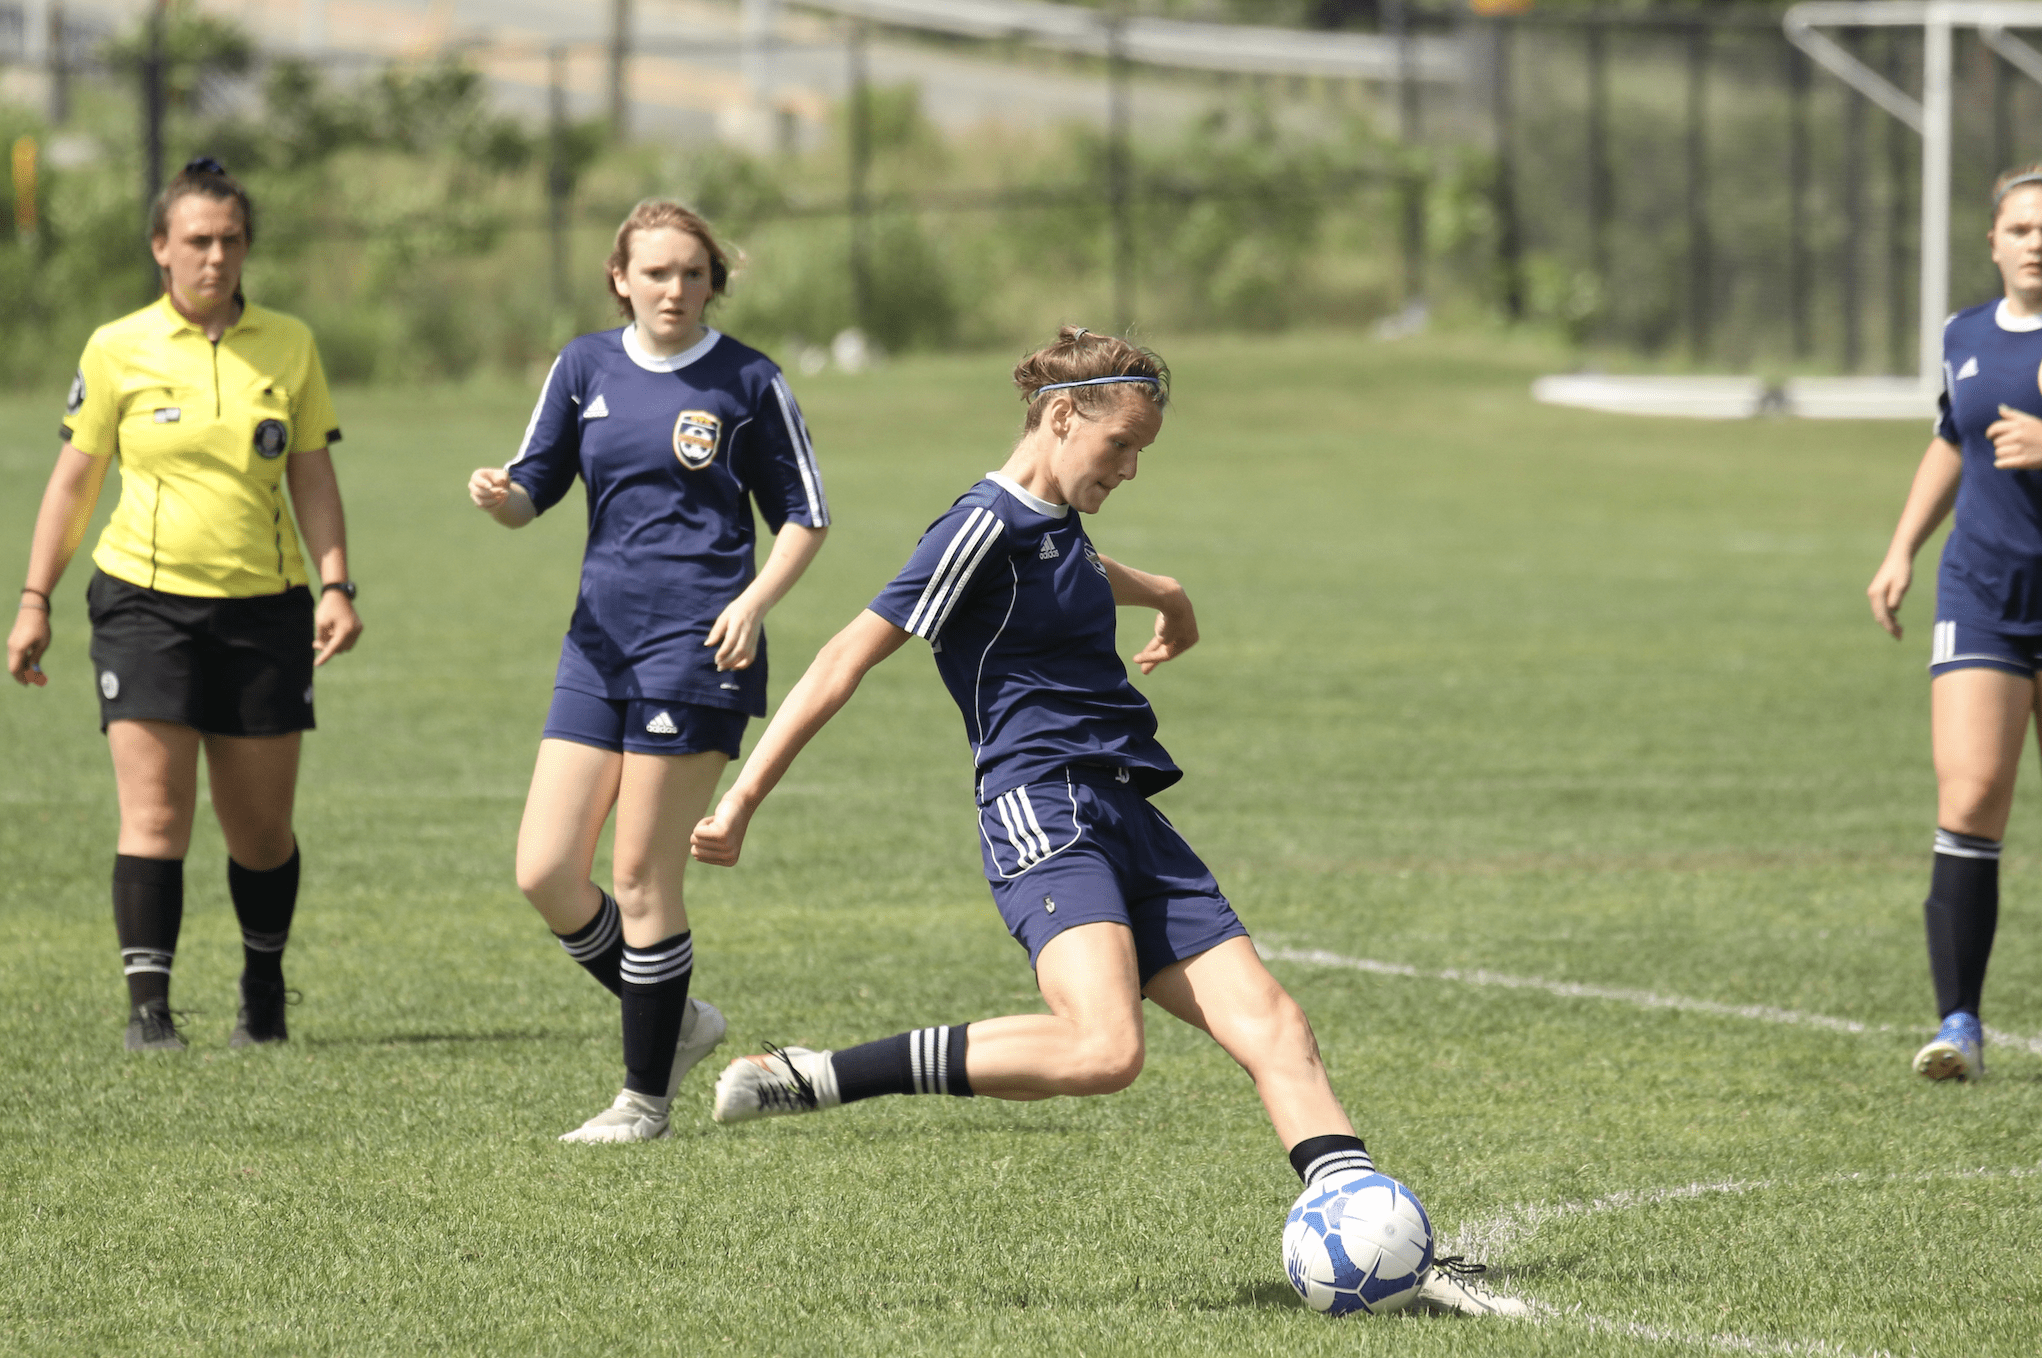 Shrewsbury’s Meghan Dowd takes a shot during a recent game.